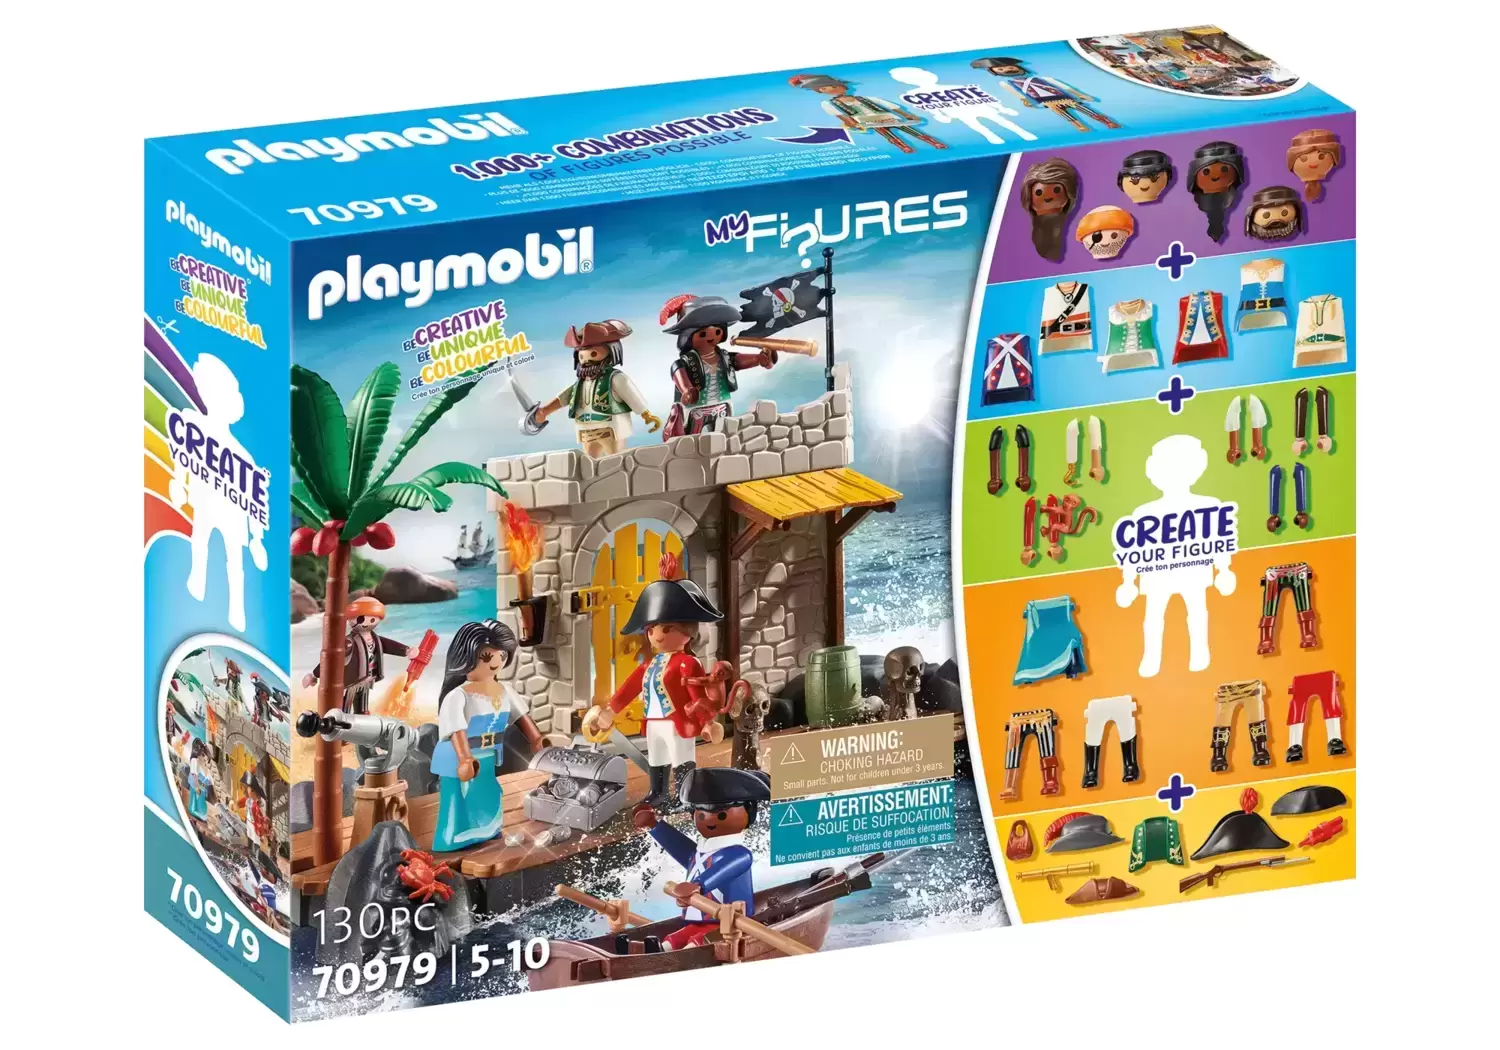 Unclassified Playmobil - My Figures: Island of the Pirates